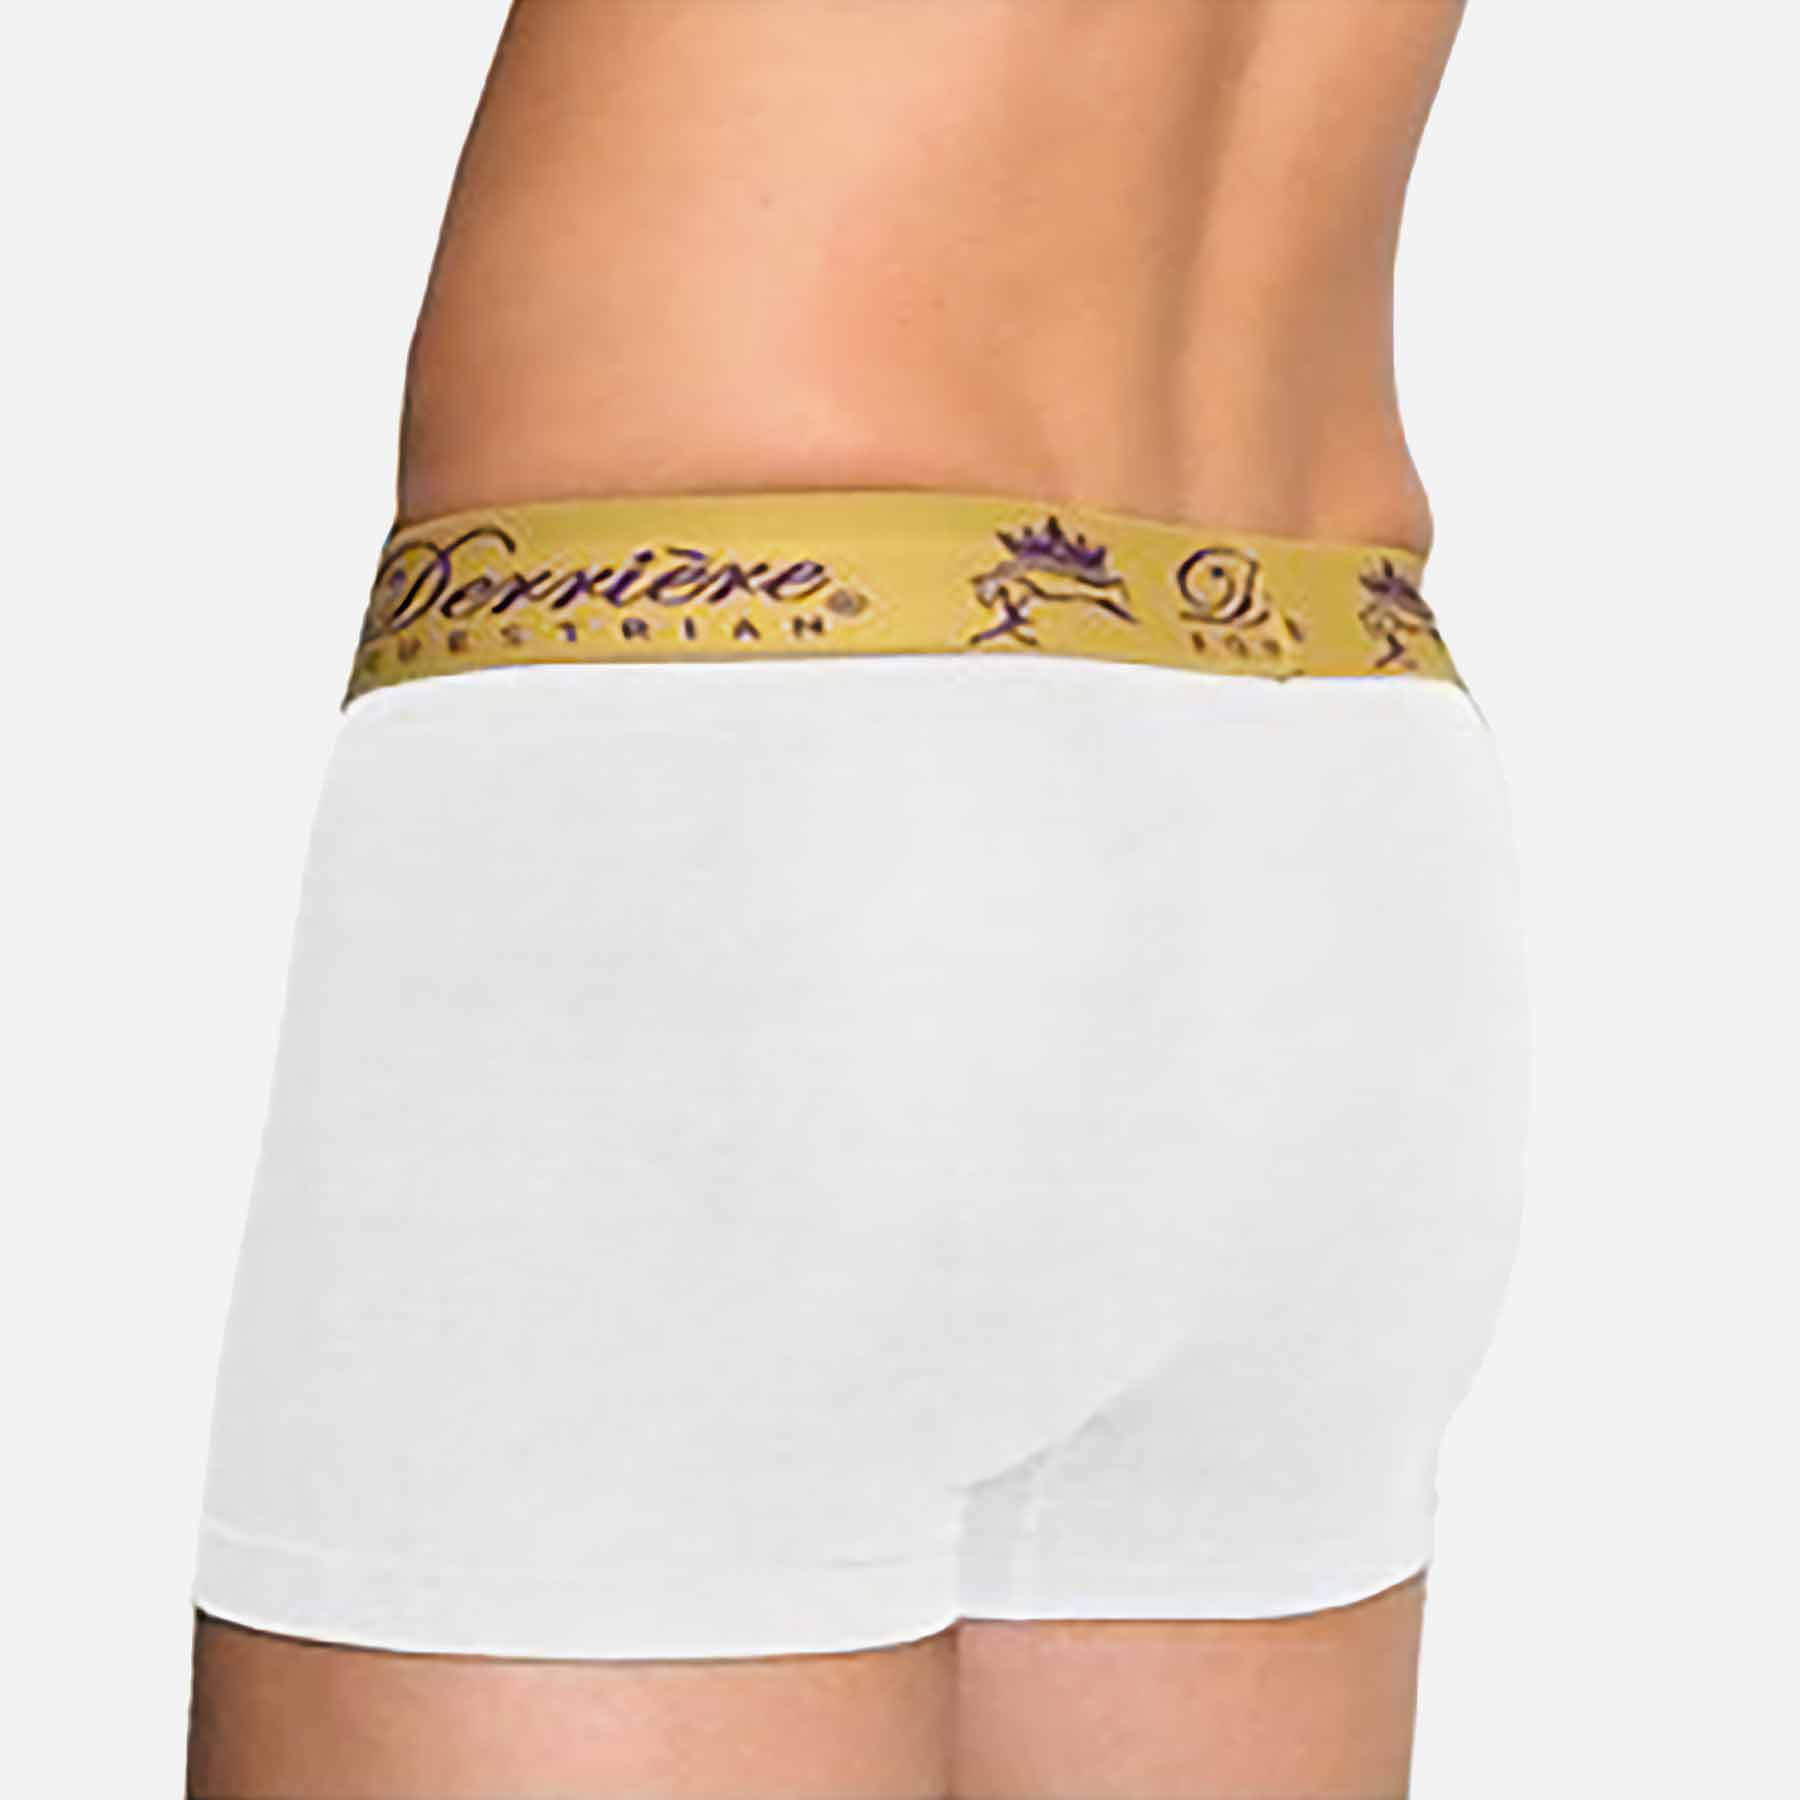 Derriere Bonded Padded Shorty Male